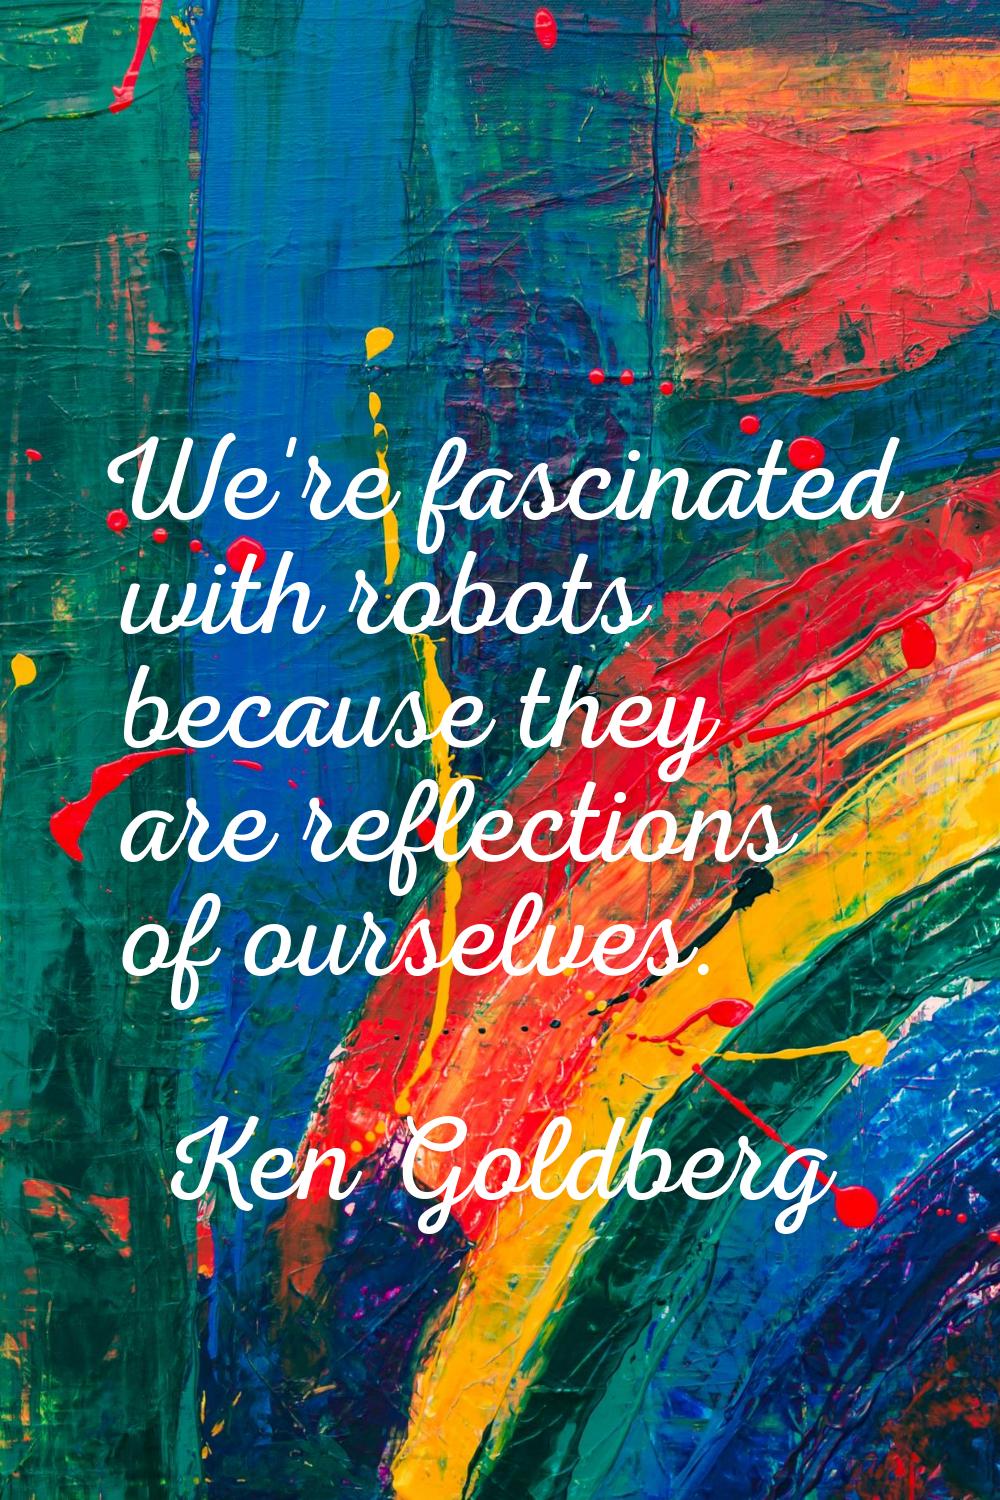 We're fascinated with robots because they are reflections of ourselves.